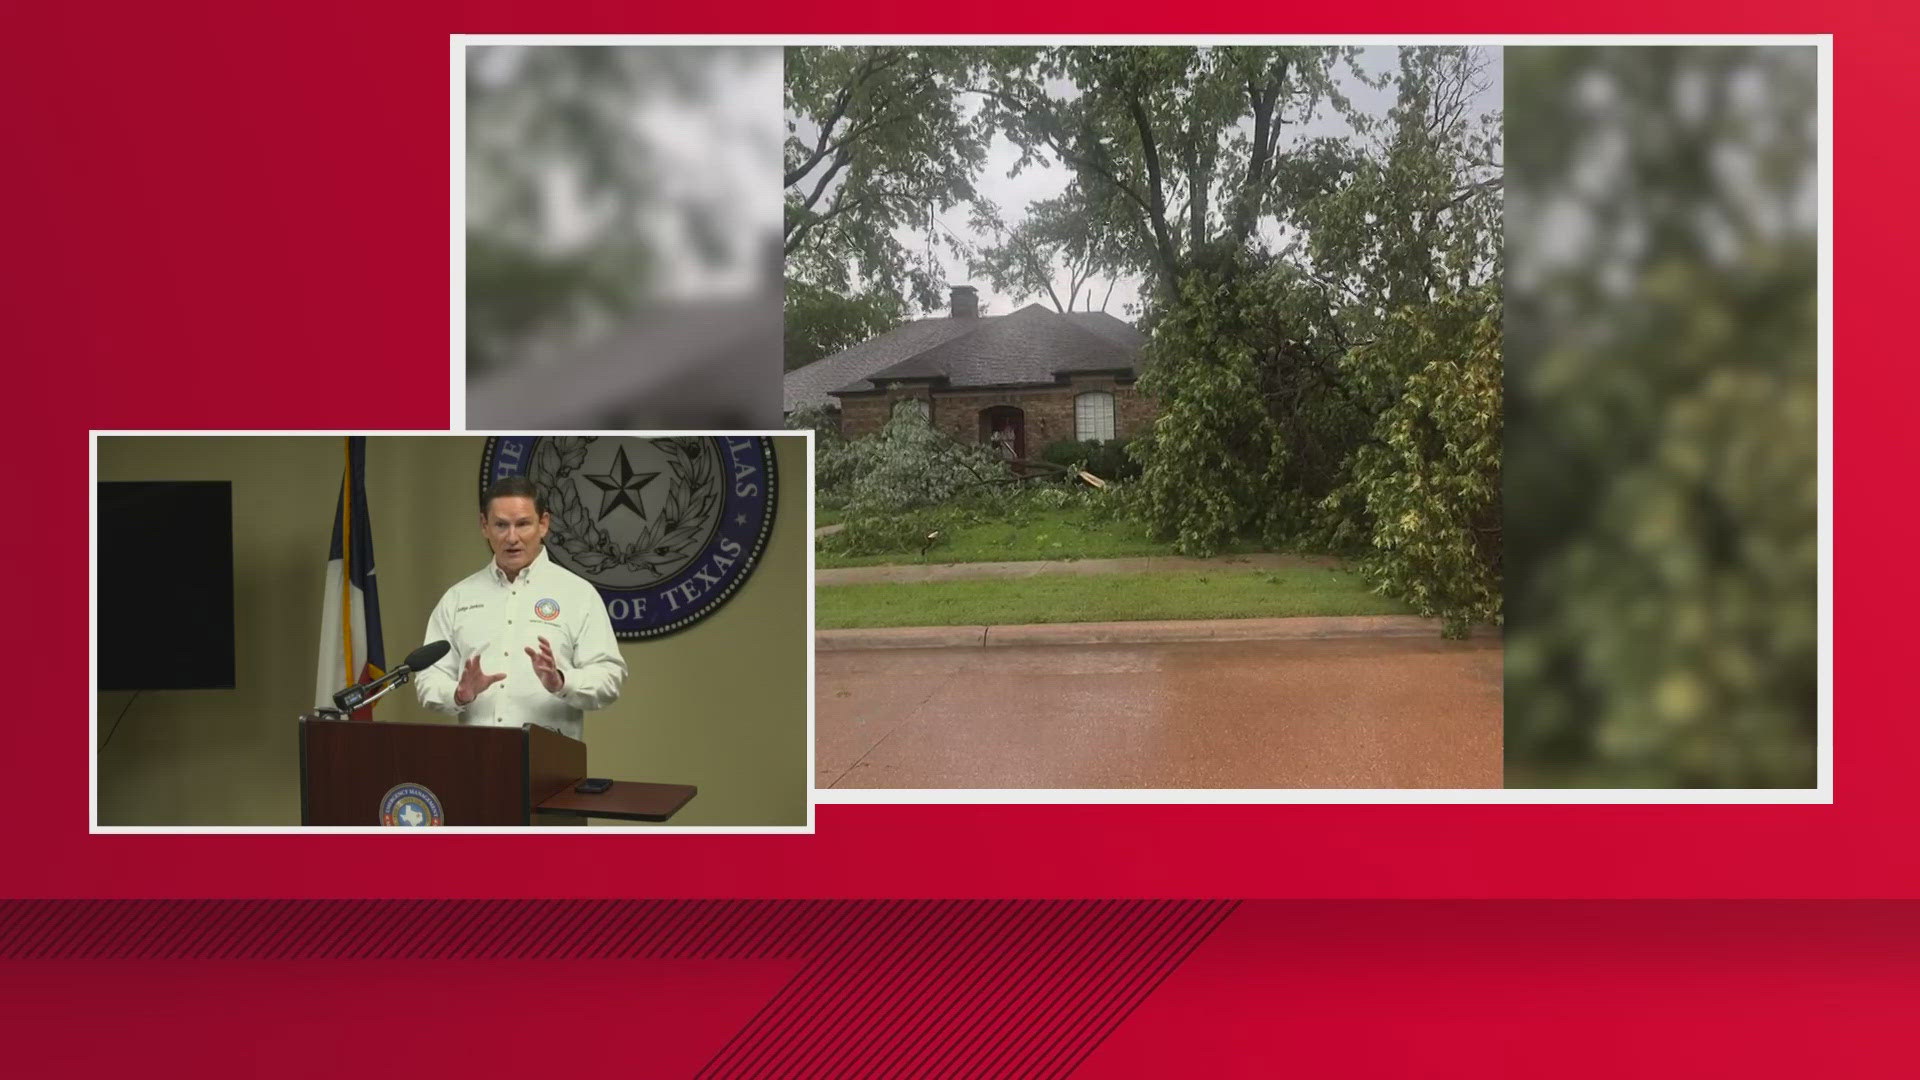 Dallas County Judge Clay Jenkins declared a disaster after severe storm damage.